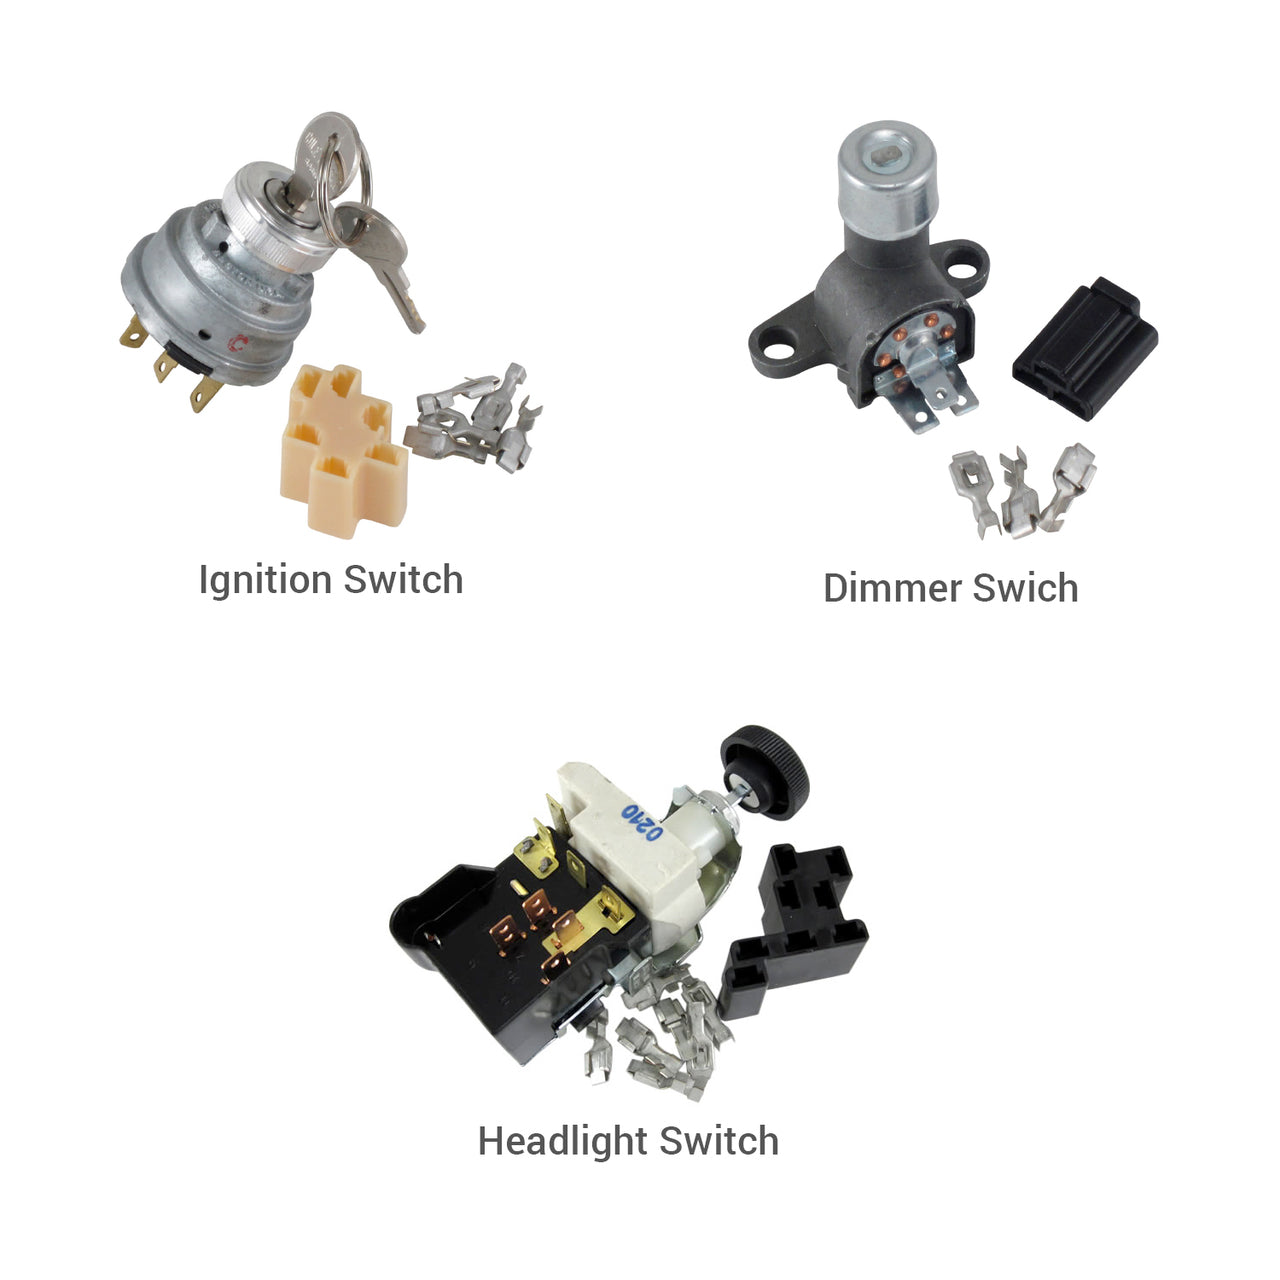 3-Switch Kit Headlight, Dimmer and Ignition Switch